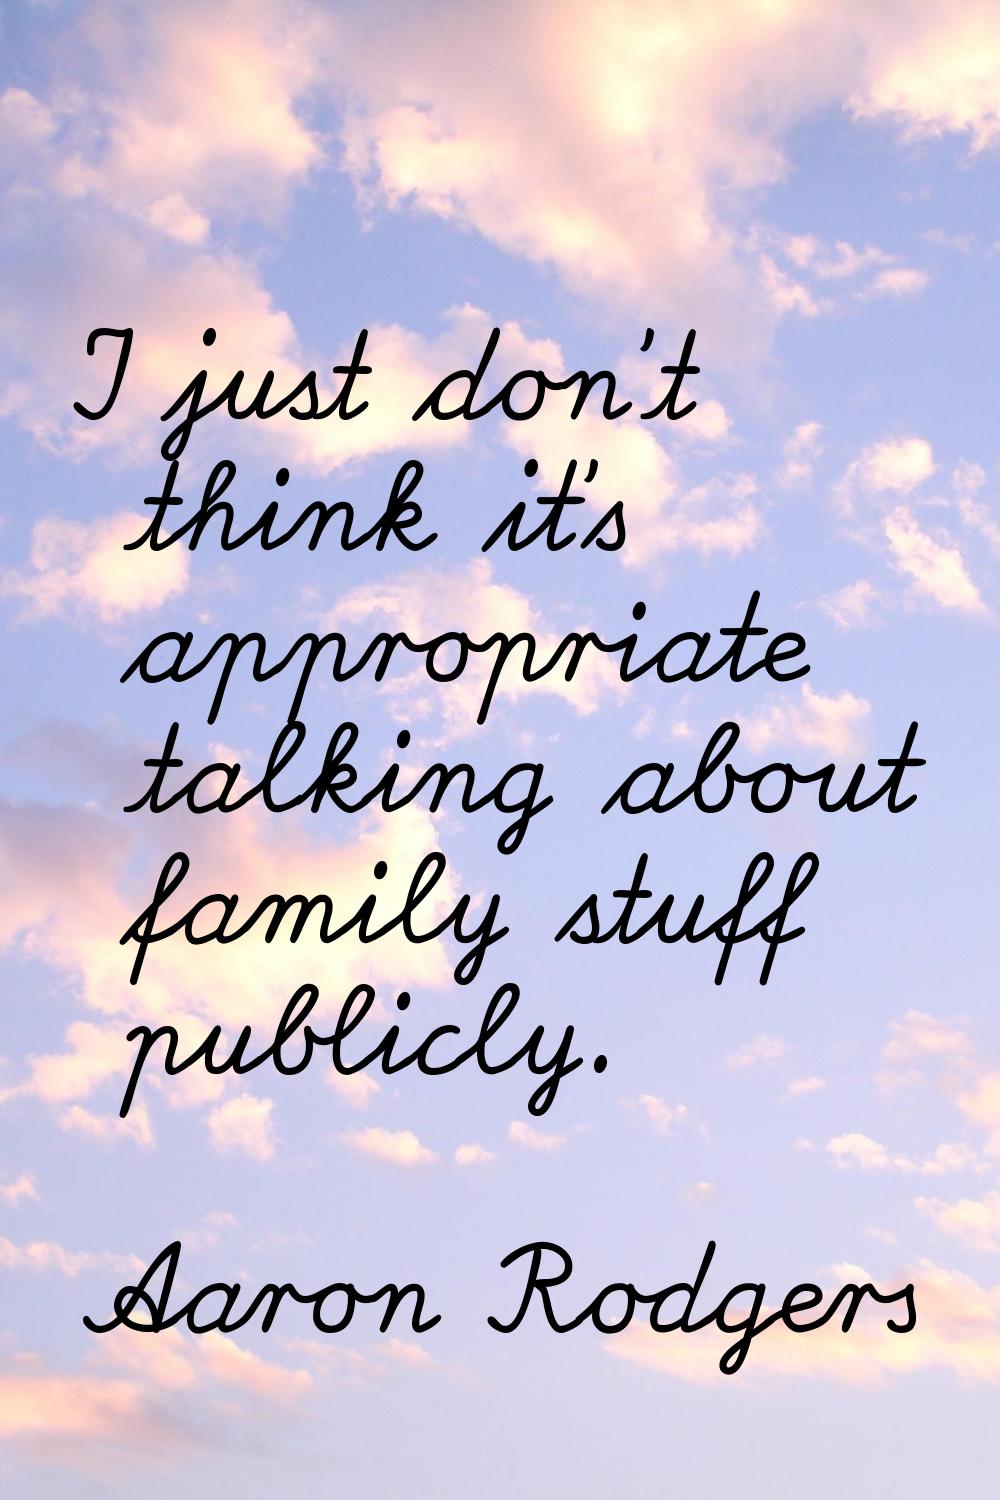 I just don't think it's appropriate talking about family stuff publicly.